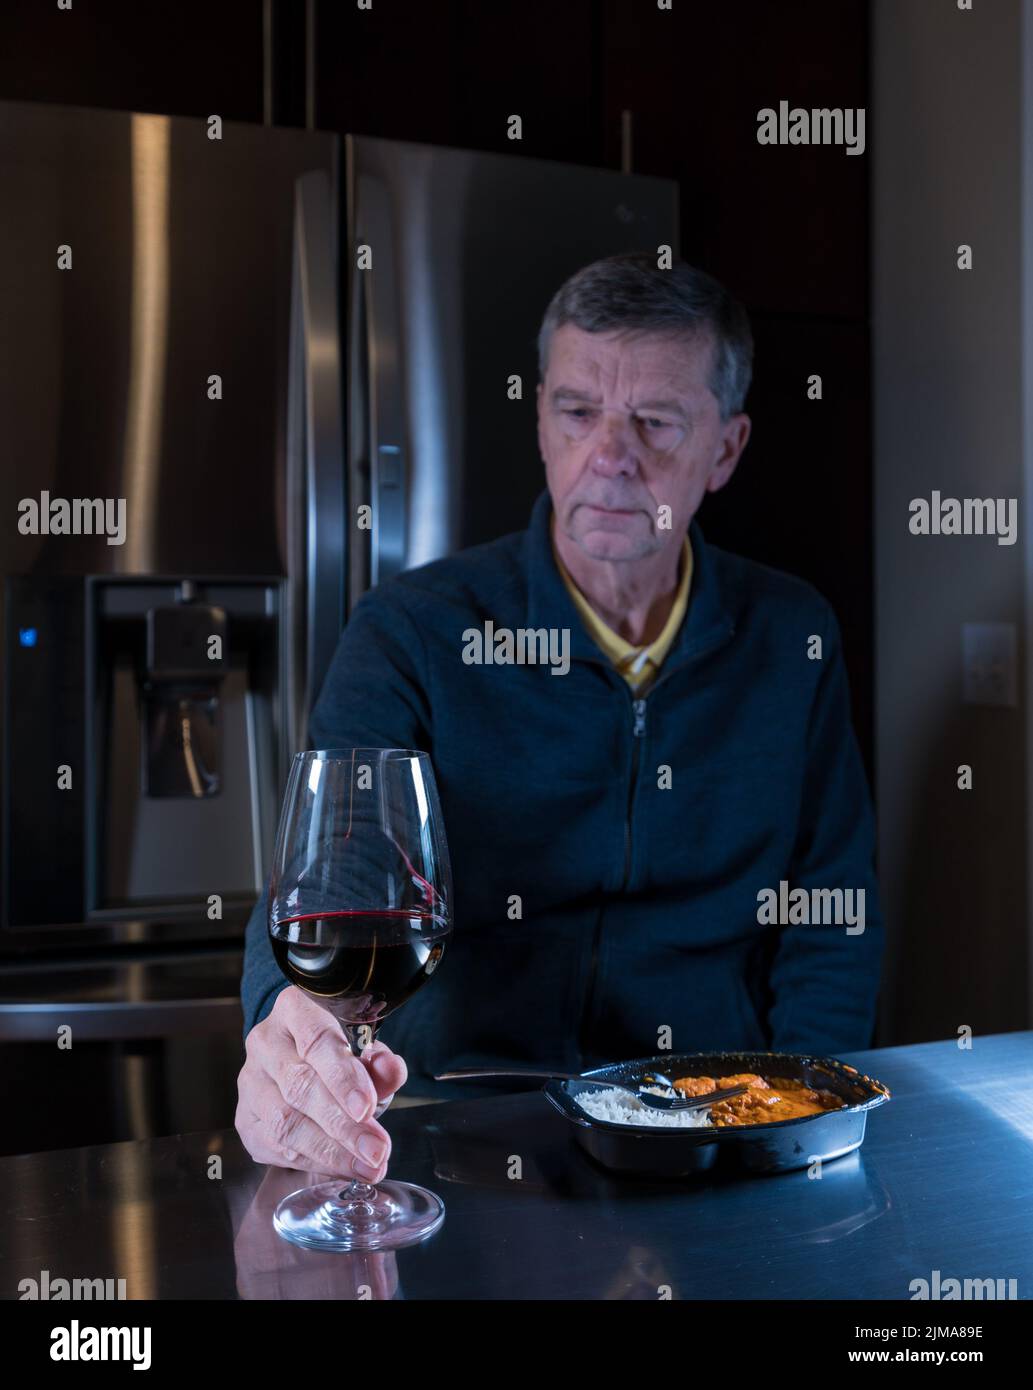 Lonely senior man eating ready meal at table Stock Photo